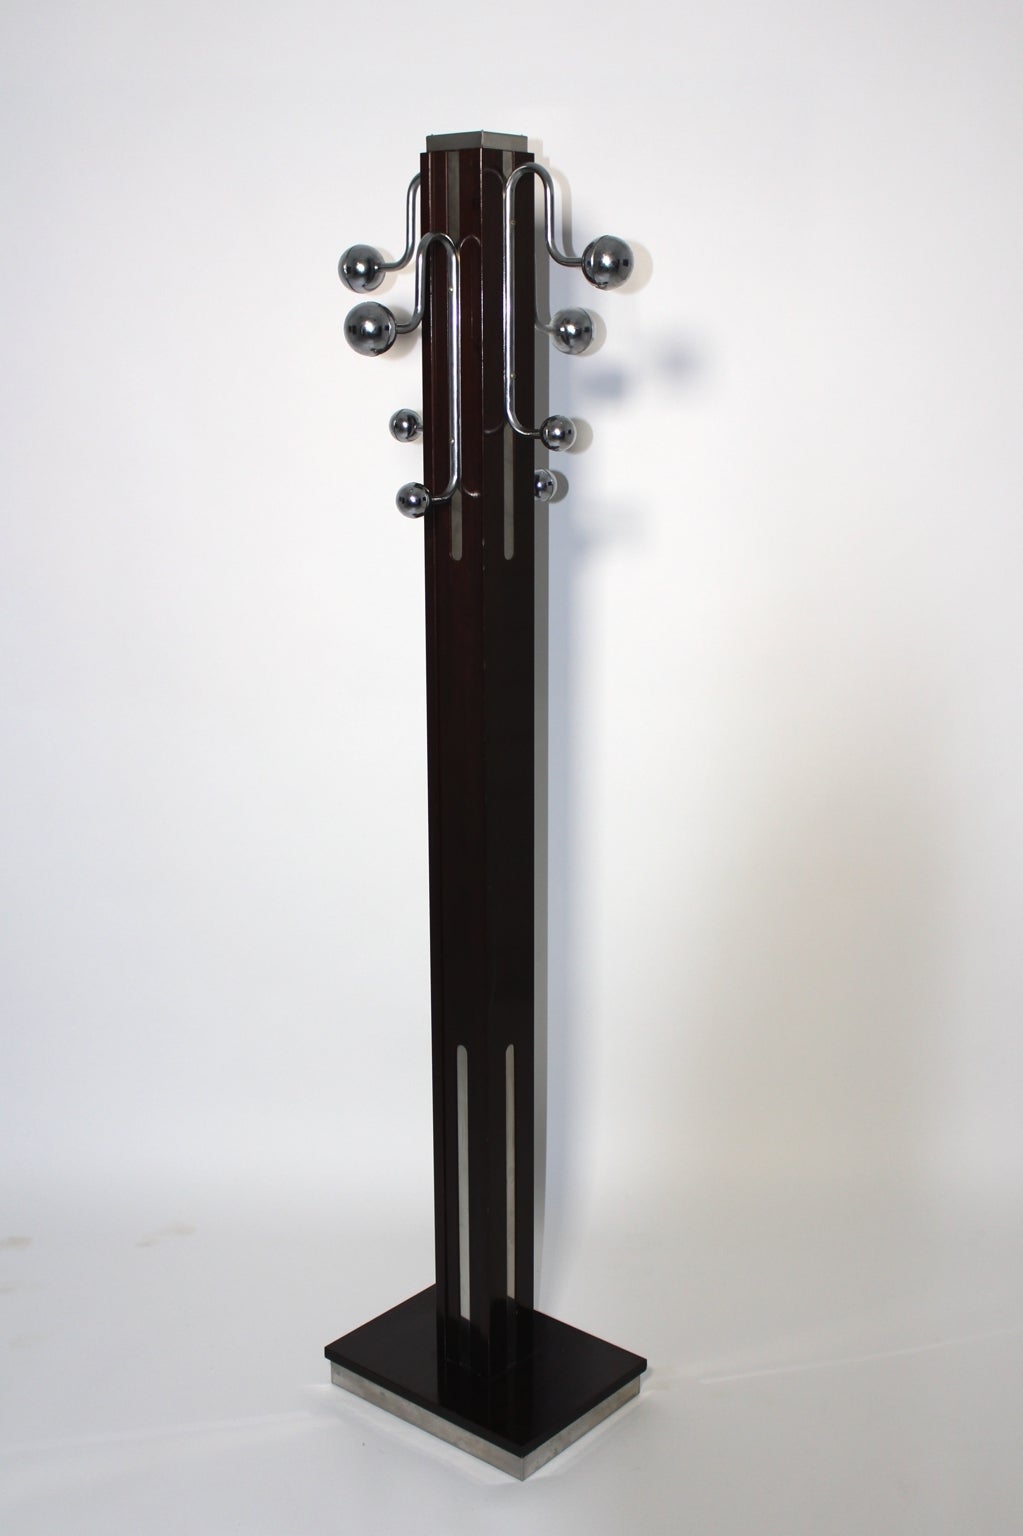 A  vintage rosewood coat stand or coat rack, which was designed by Pierre Cardin attributed, France, 1970s.
A typical chrome band, which covers the edge and the top of the rack, are an important detail and points to the signature of the designer